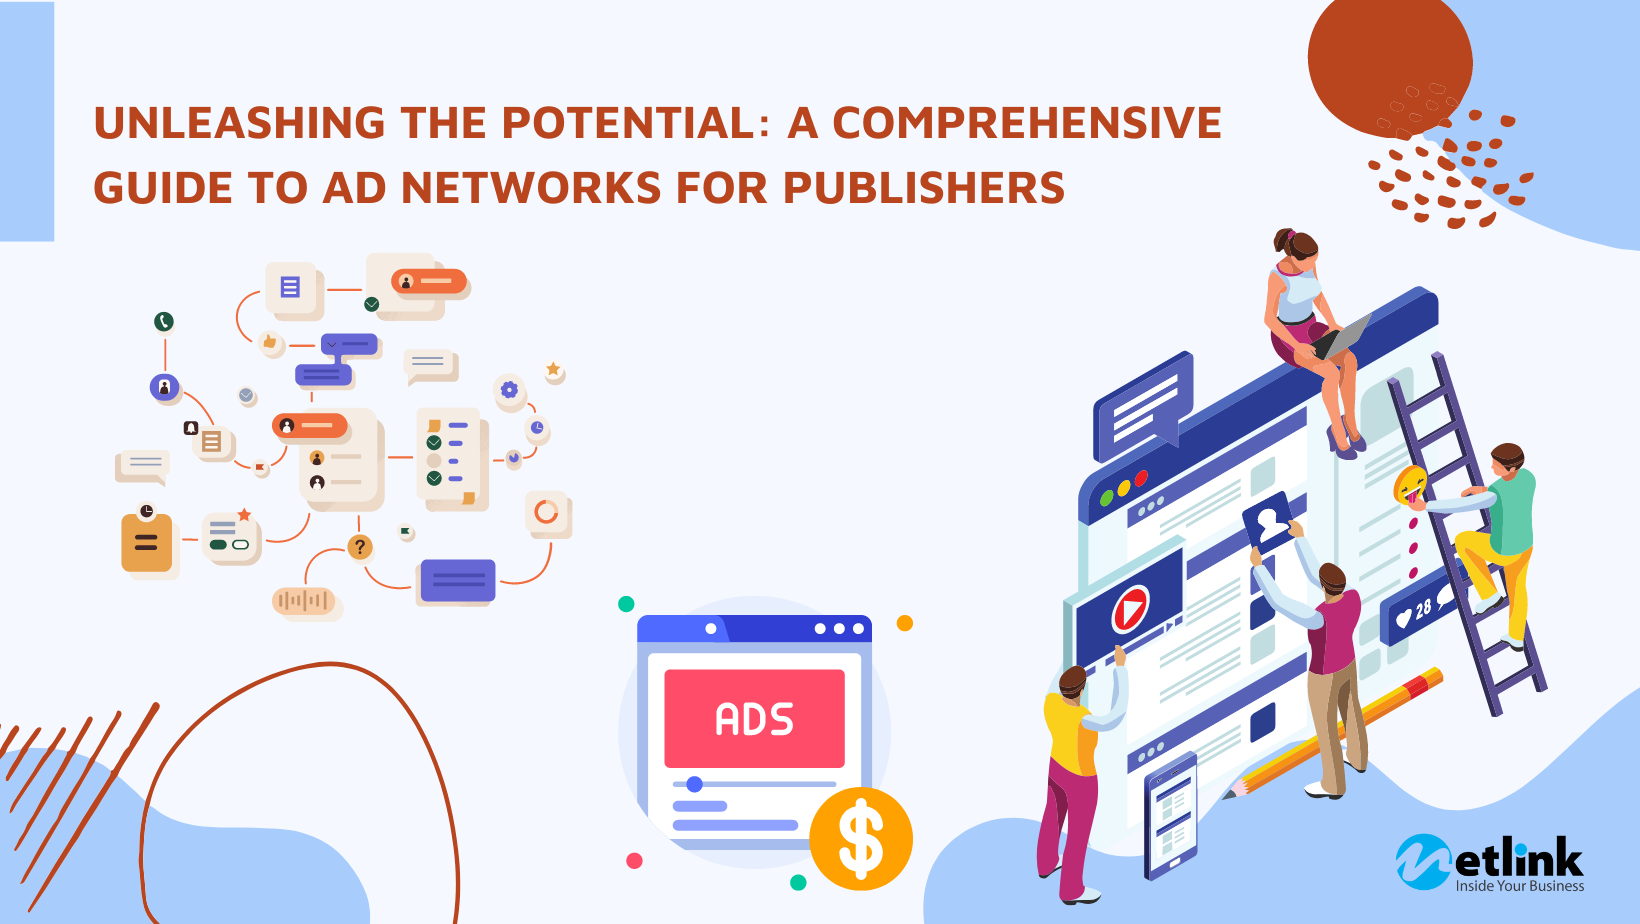 Unleashing the Potential: A Comprehensive Guide to Ad Networks for Publishers